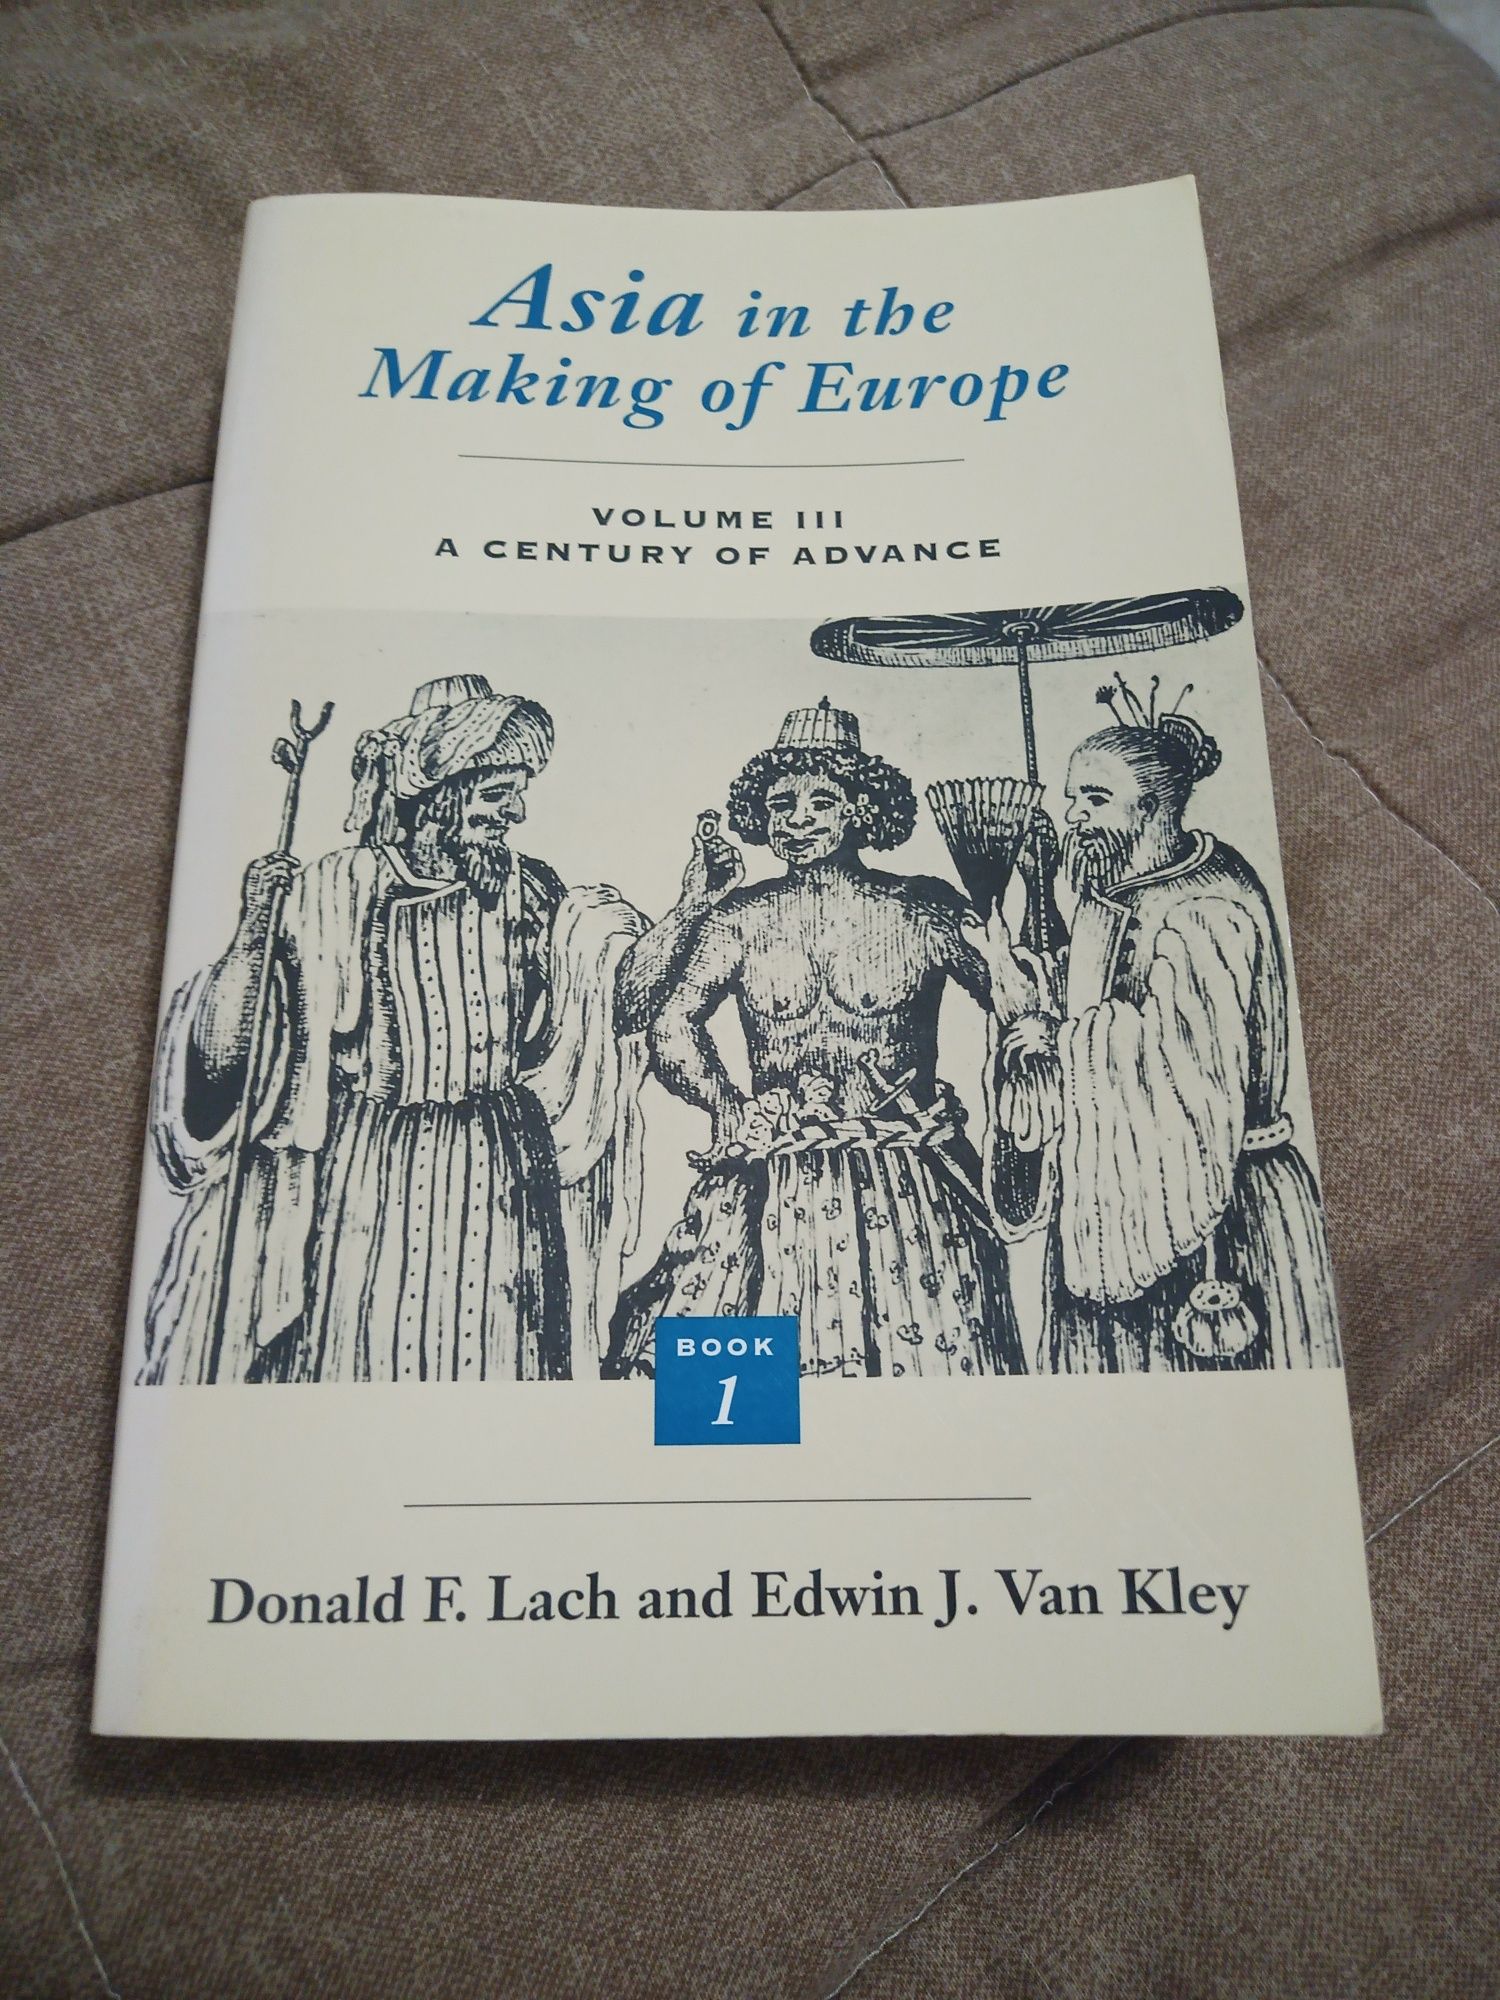 Asia in the Making of Europe, Volume III: A Century of Advance. Book 1